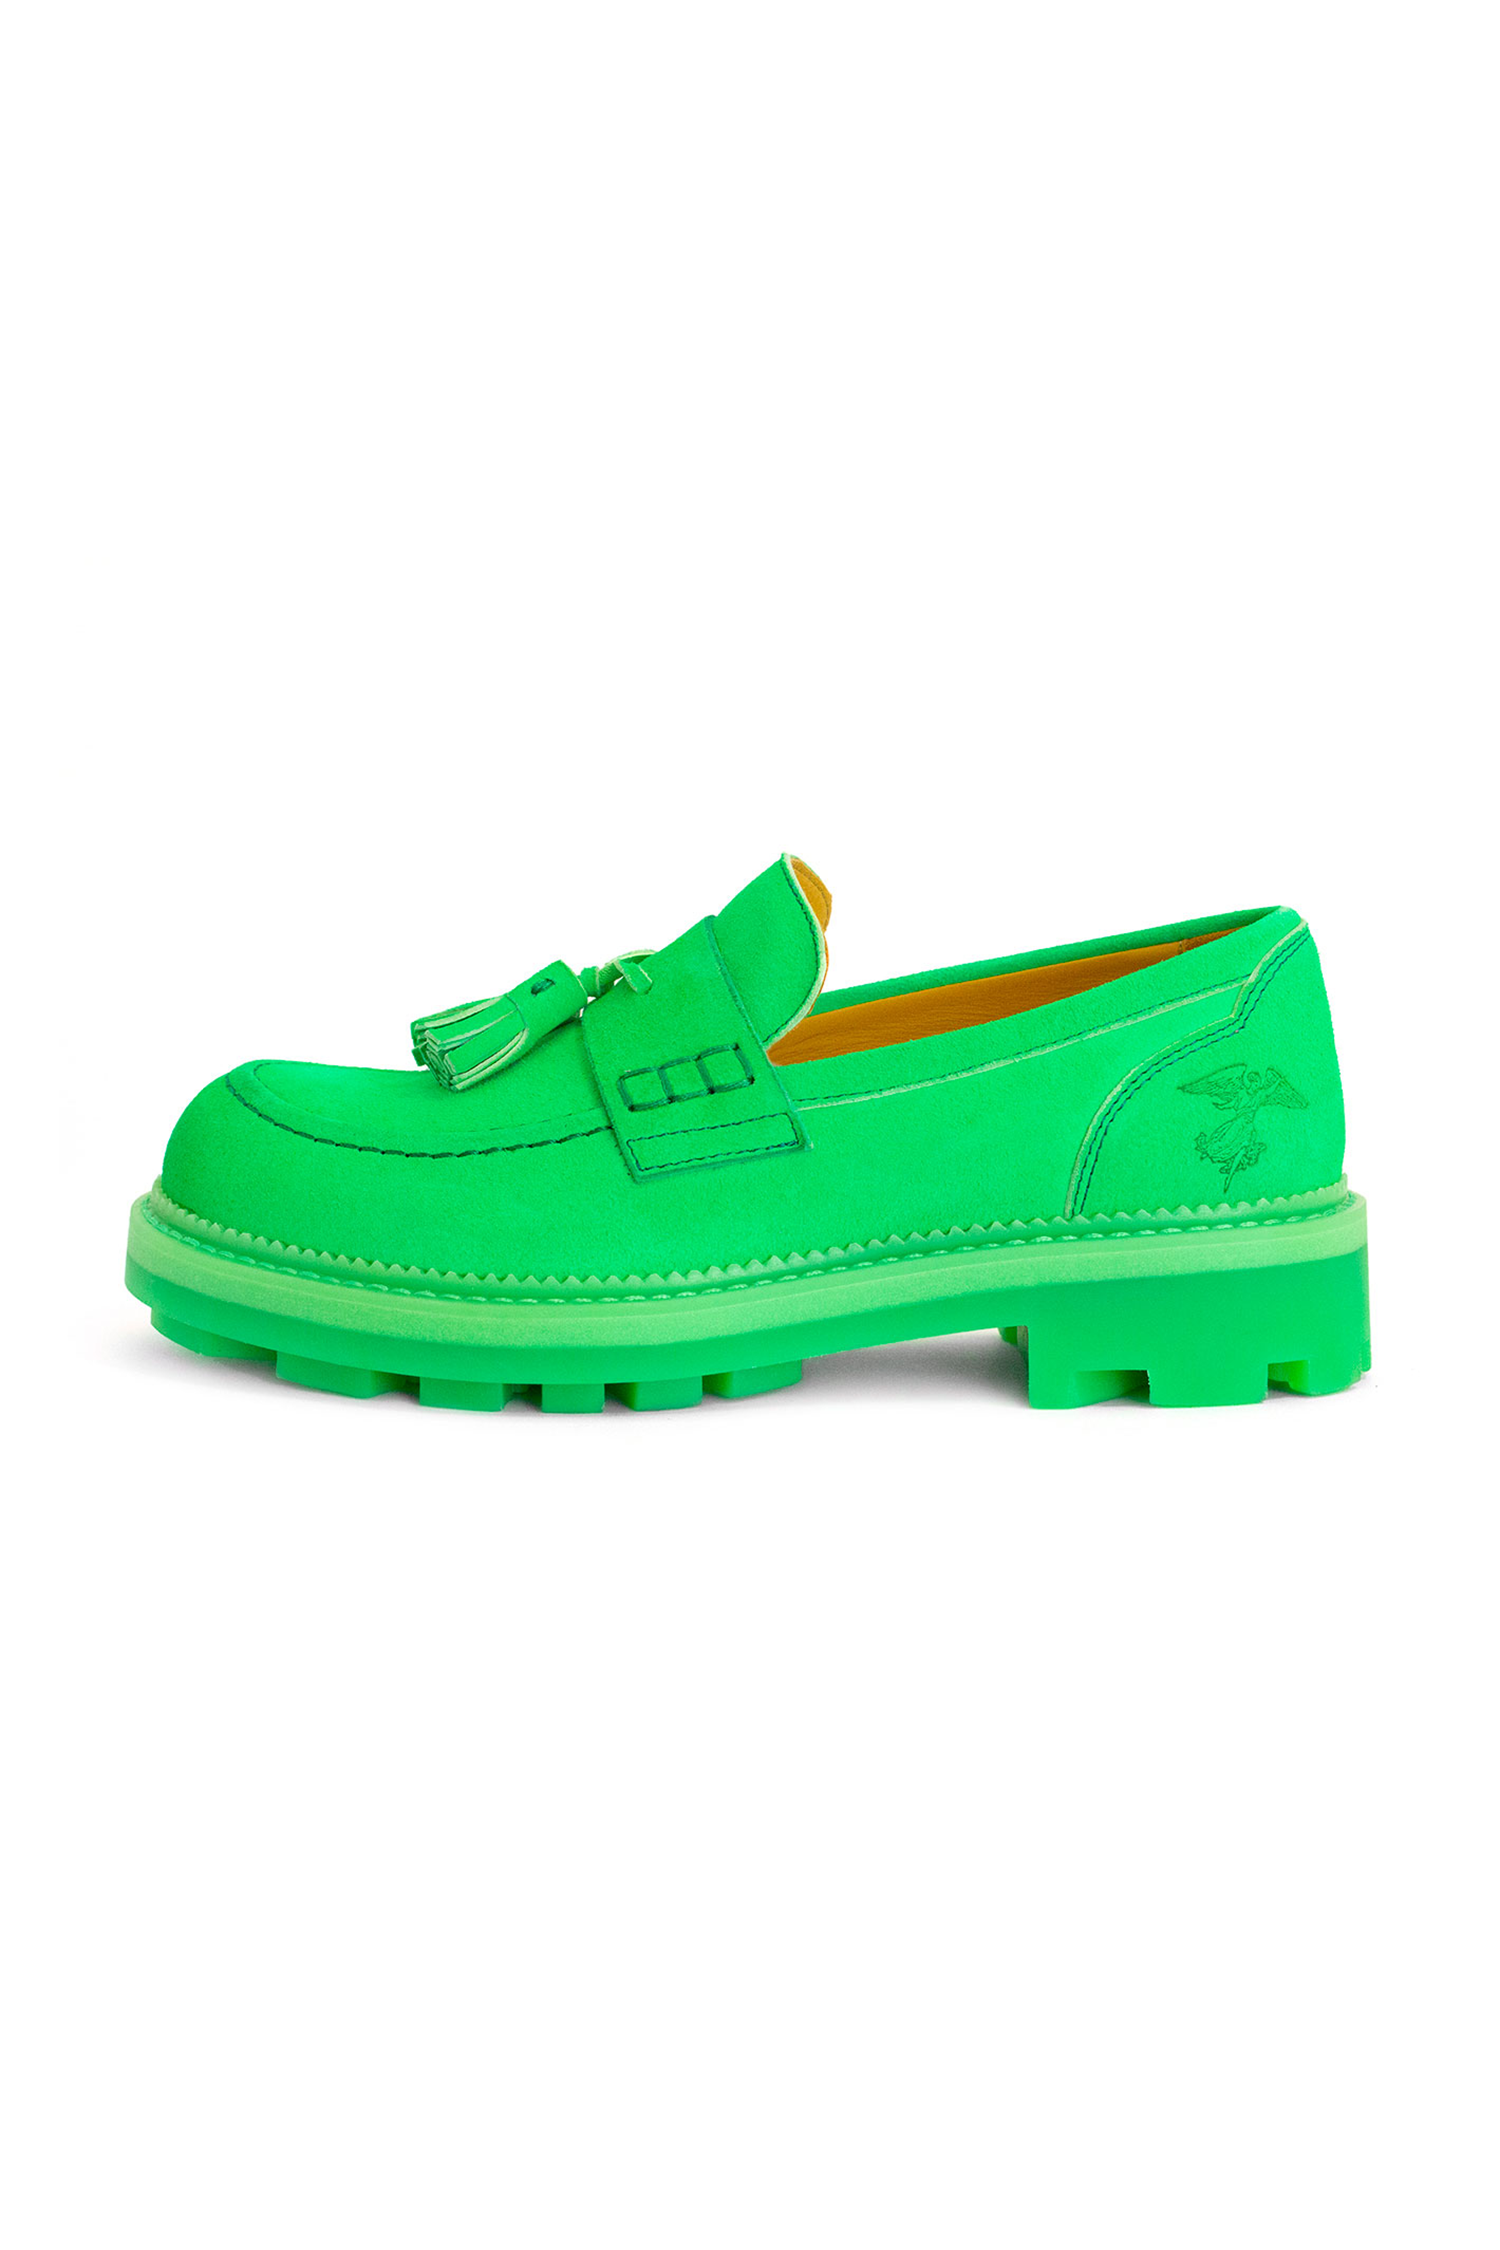 An angel is printed on the hell side, under a double green hems, the sole is in the same glo green